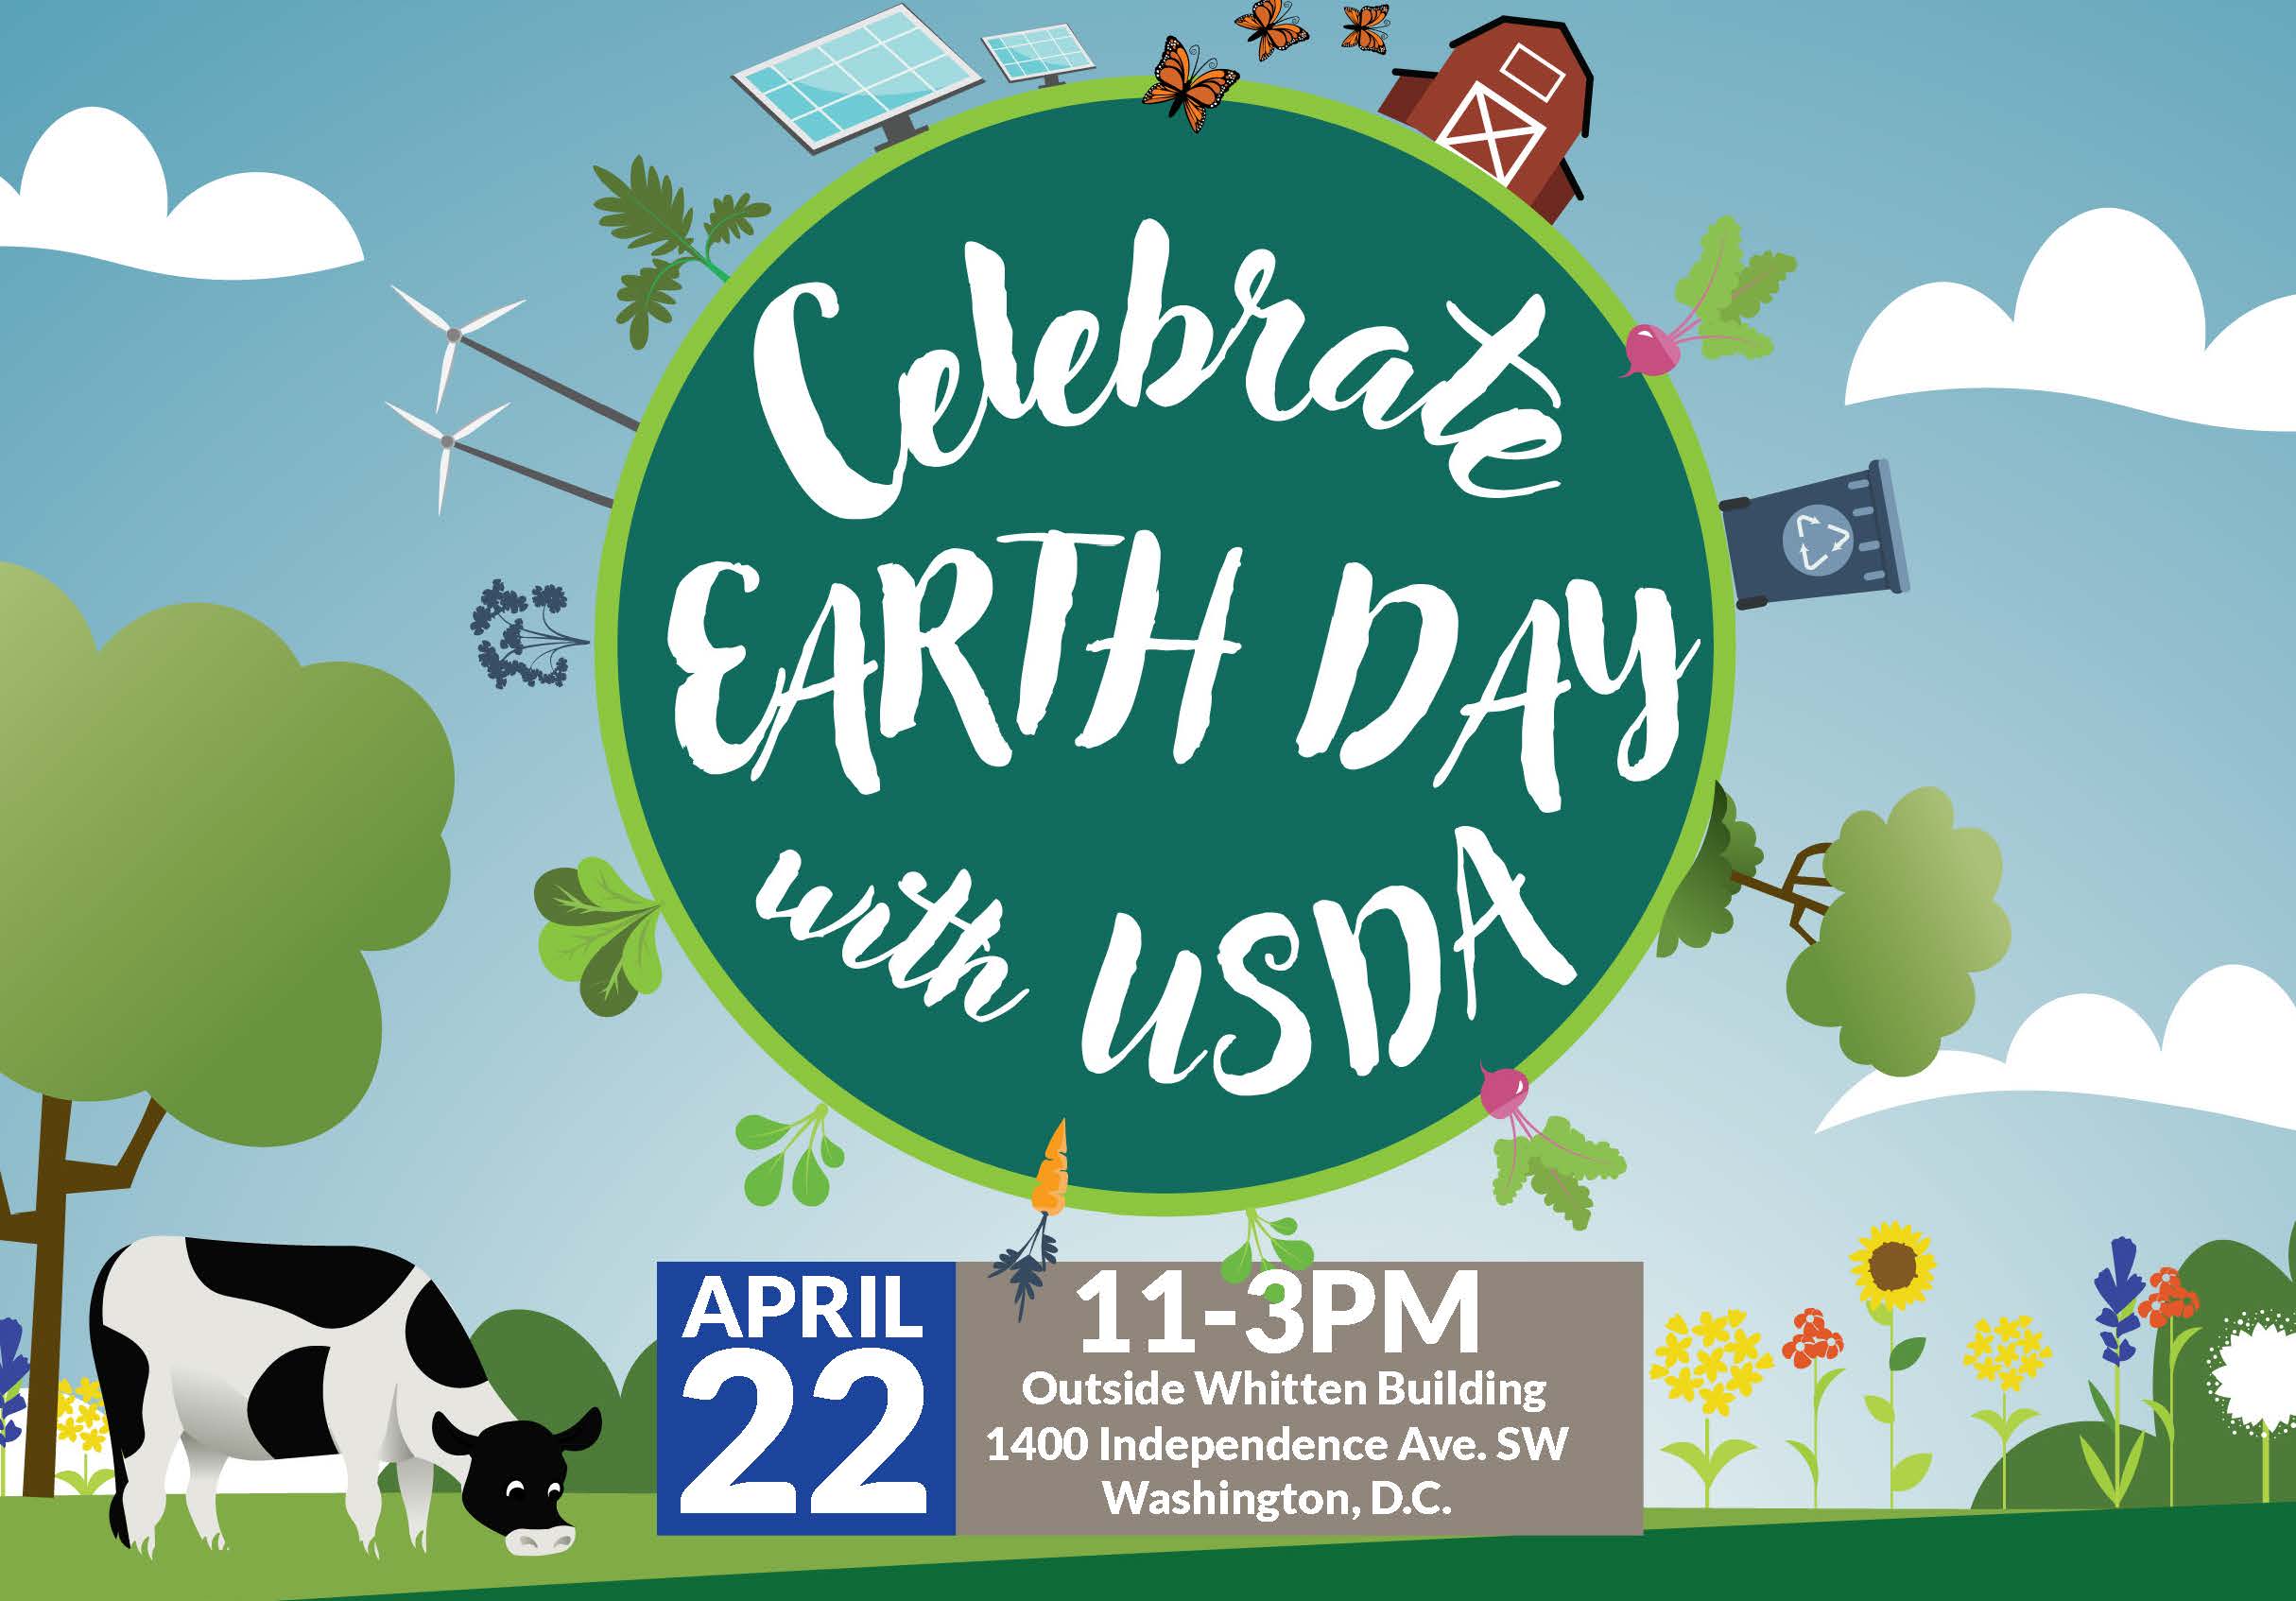 Celebrate Earth Day with USDA, April 22, 11-3PM, Outside Whitten Building 1400 Independence Ave. SW Washington, D.C.